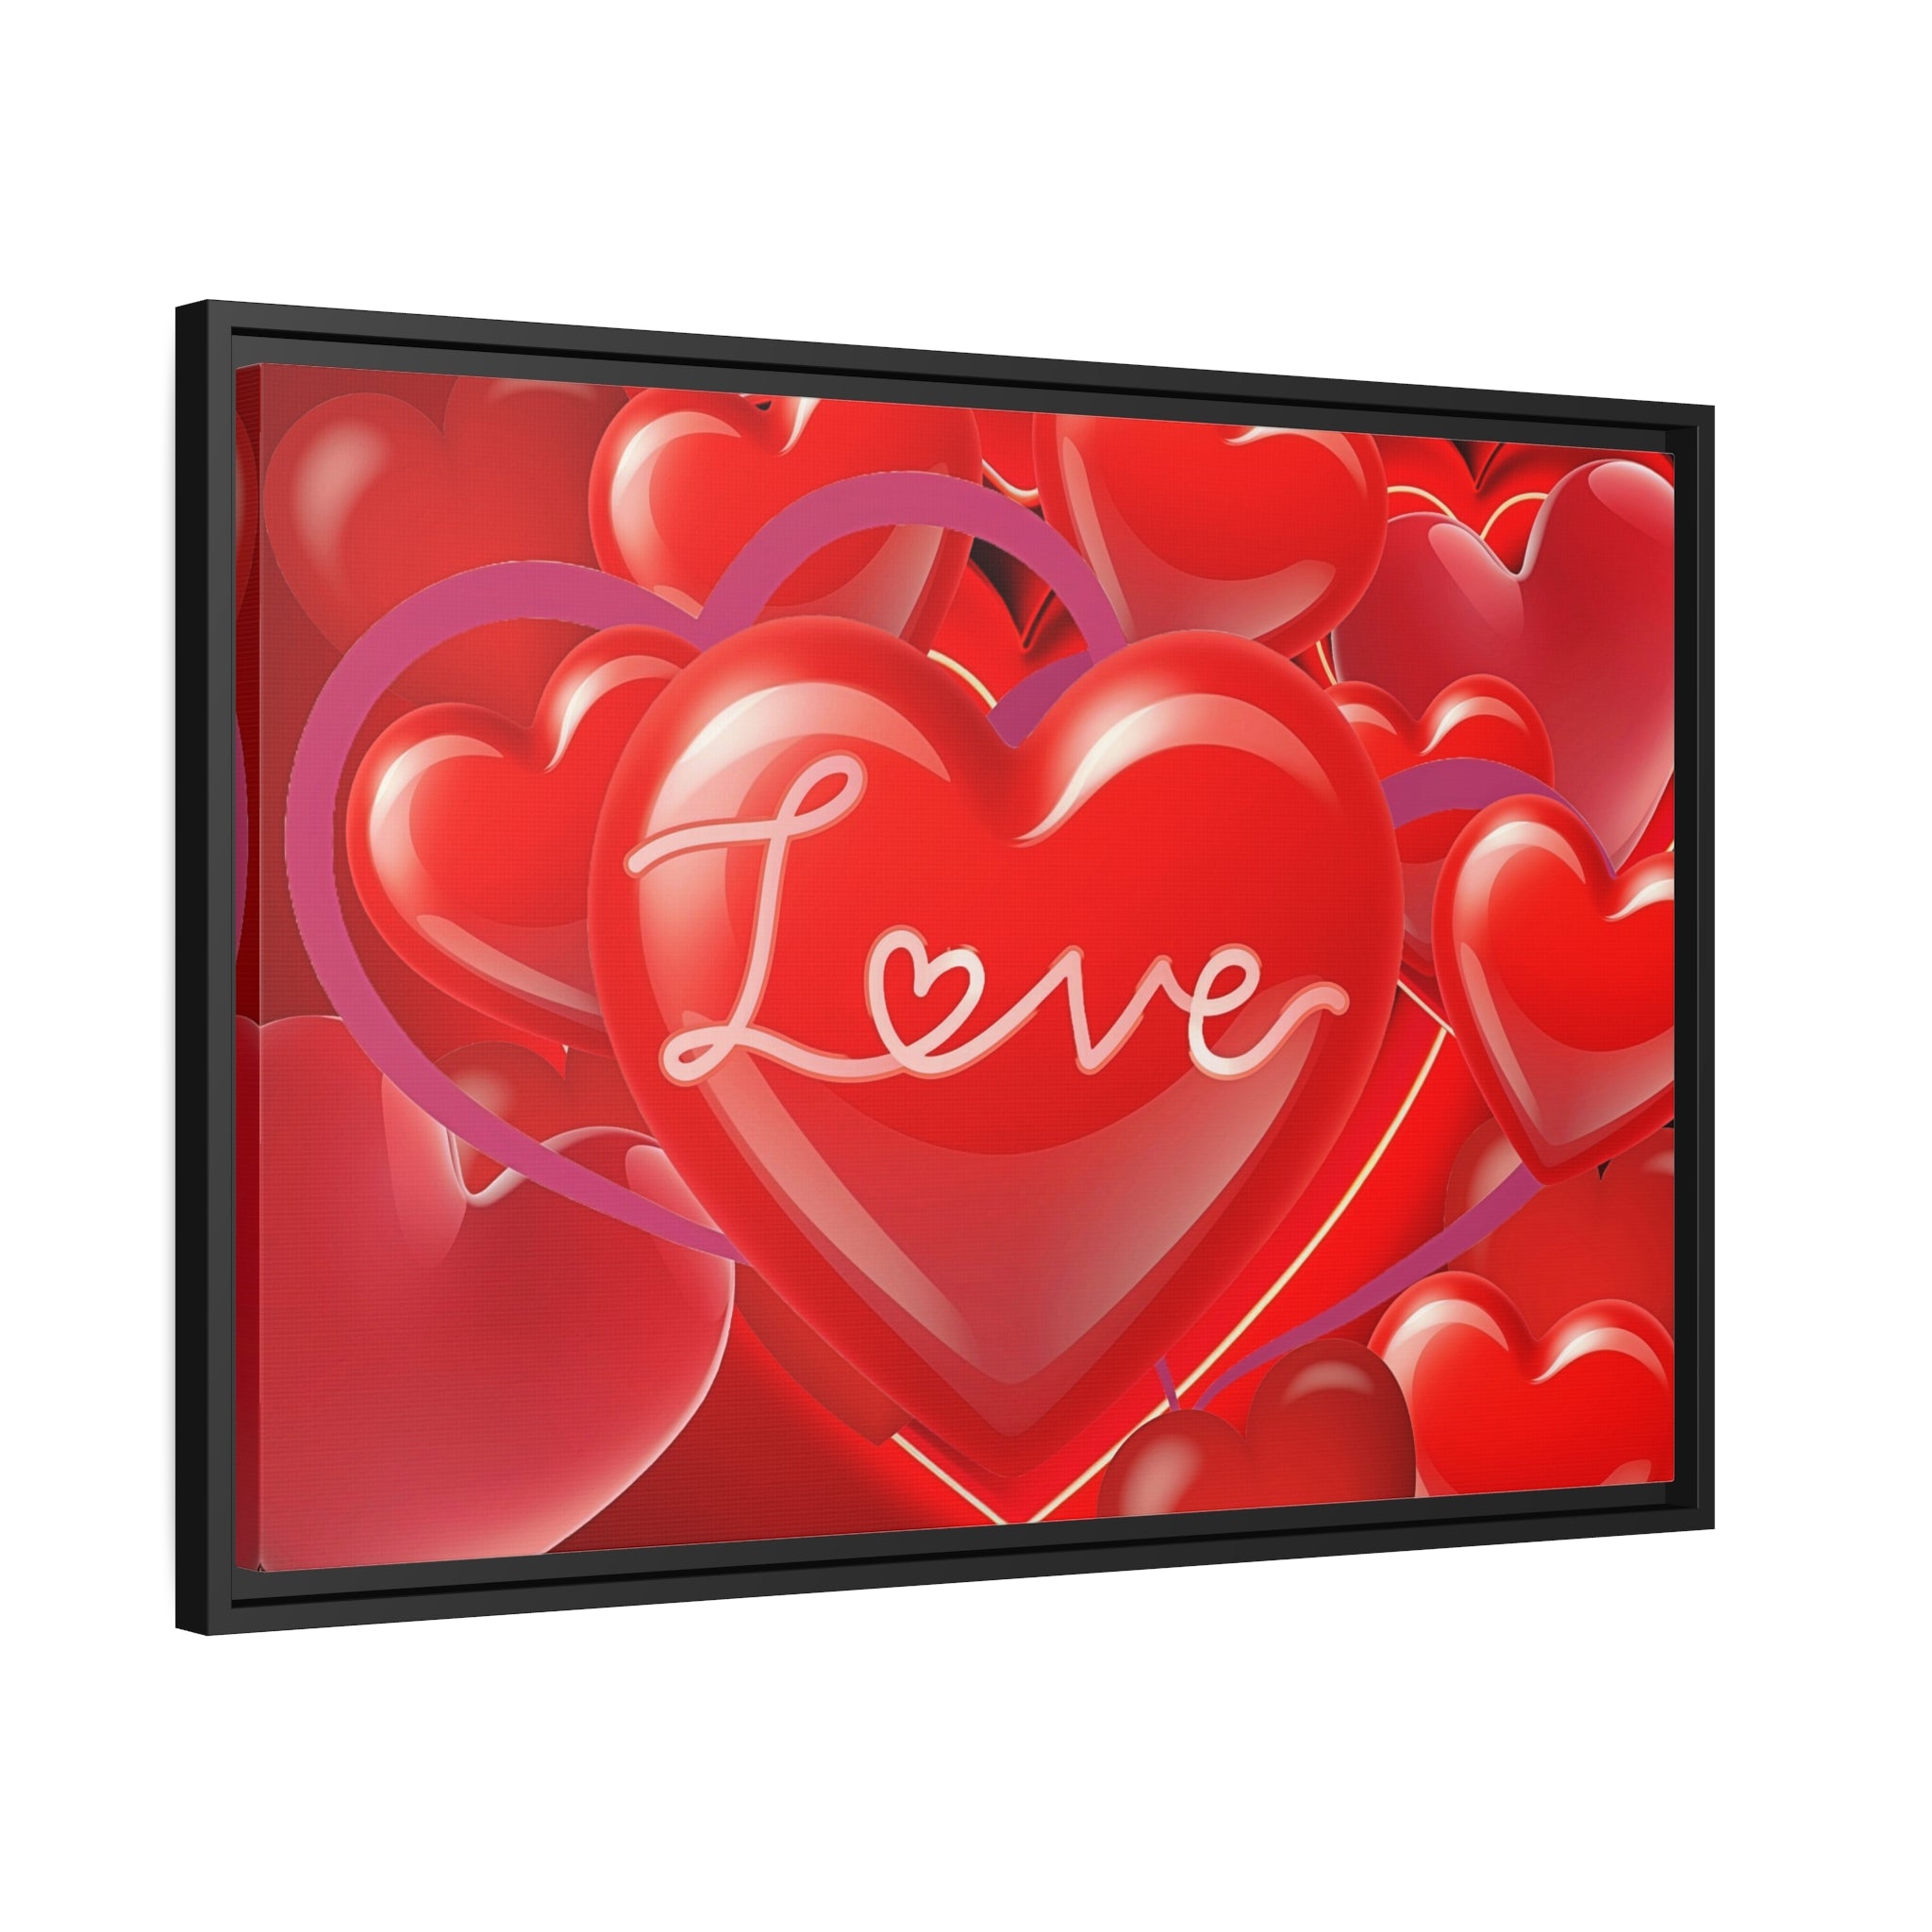 Wall Art LOVE YOU MORE Canvas Print Painting Original Giclee + Frame Love Nice Beauty Fun Design Fit Hot House Home Office Gift Ready Hang Living